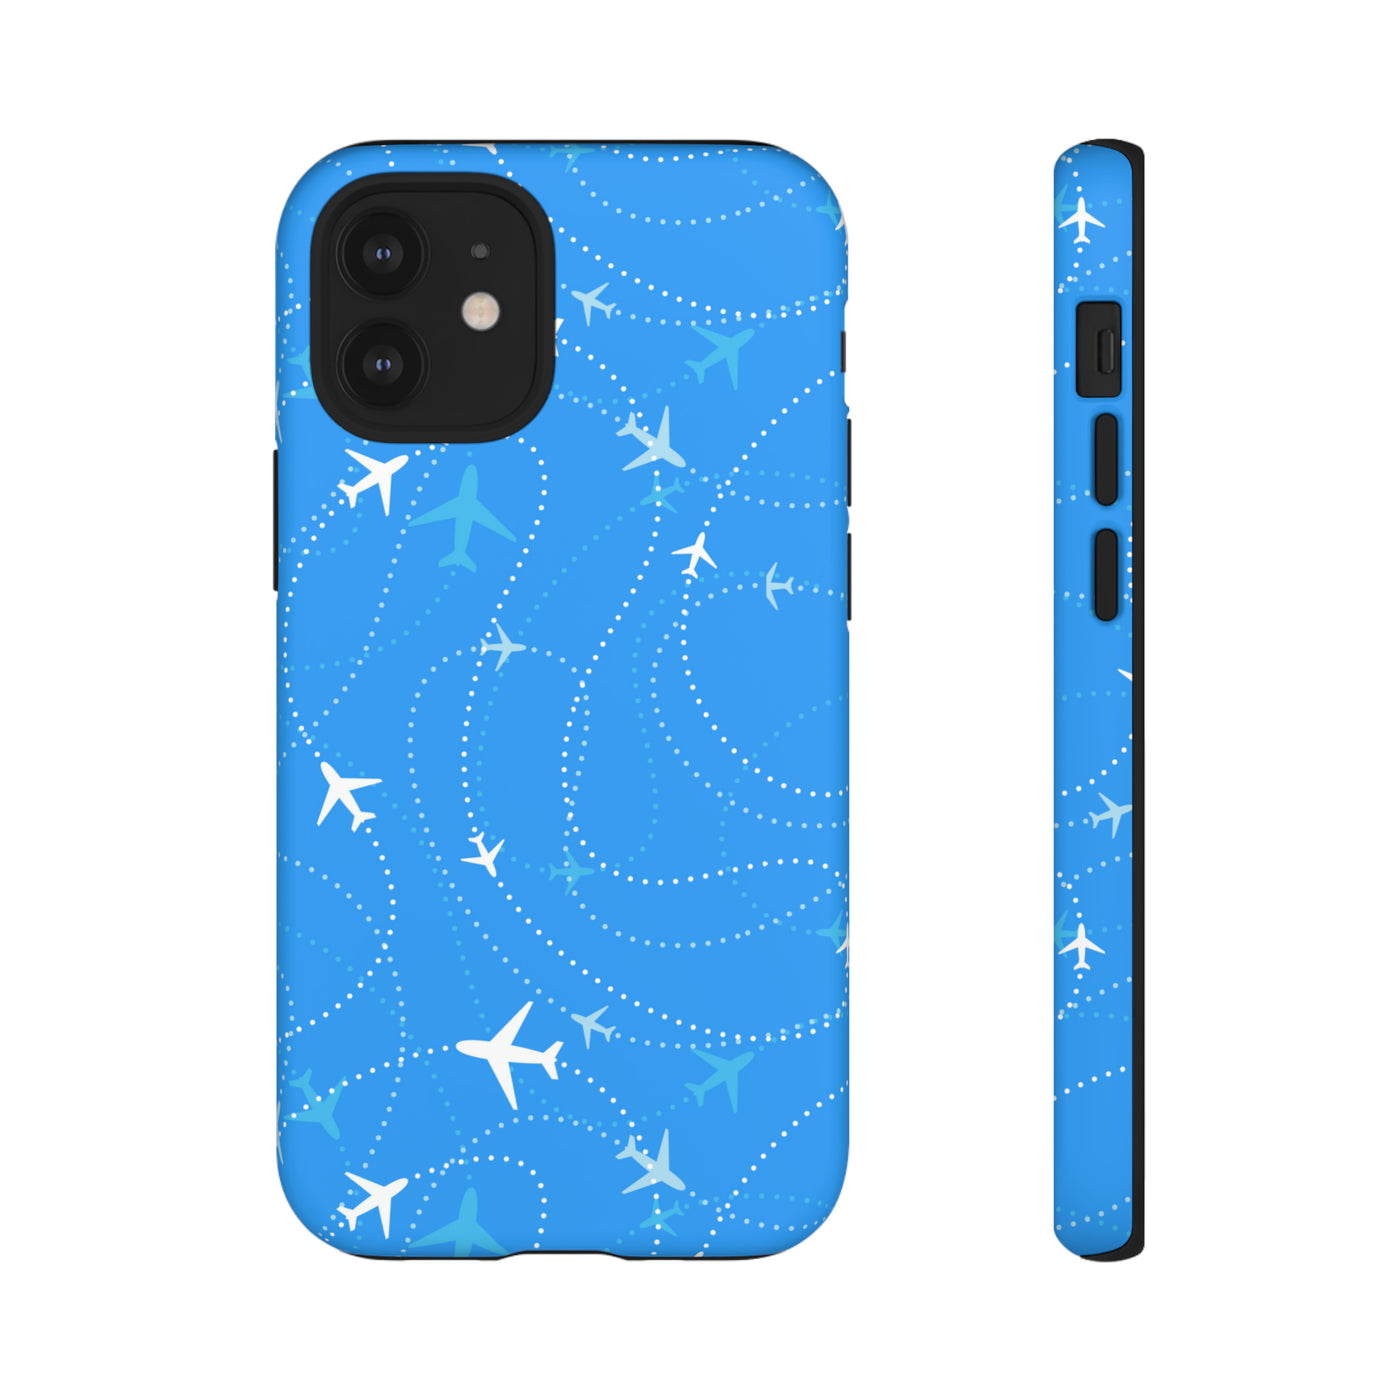 Fly Over Case